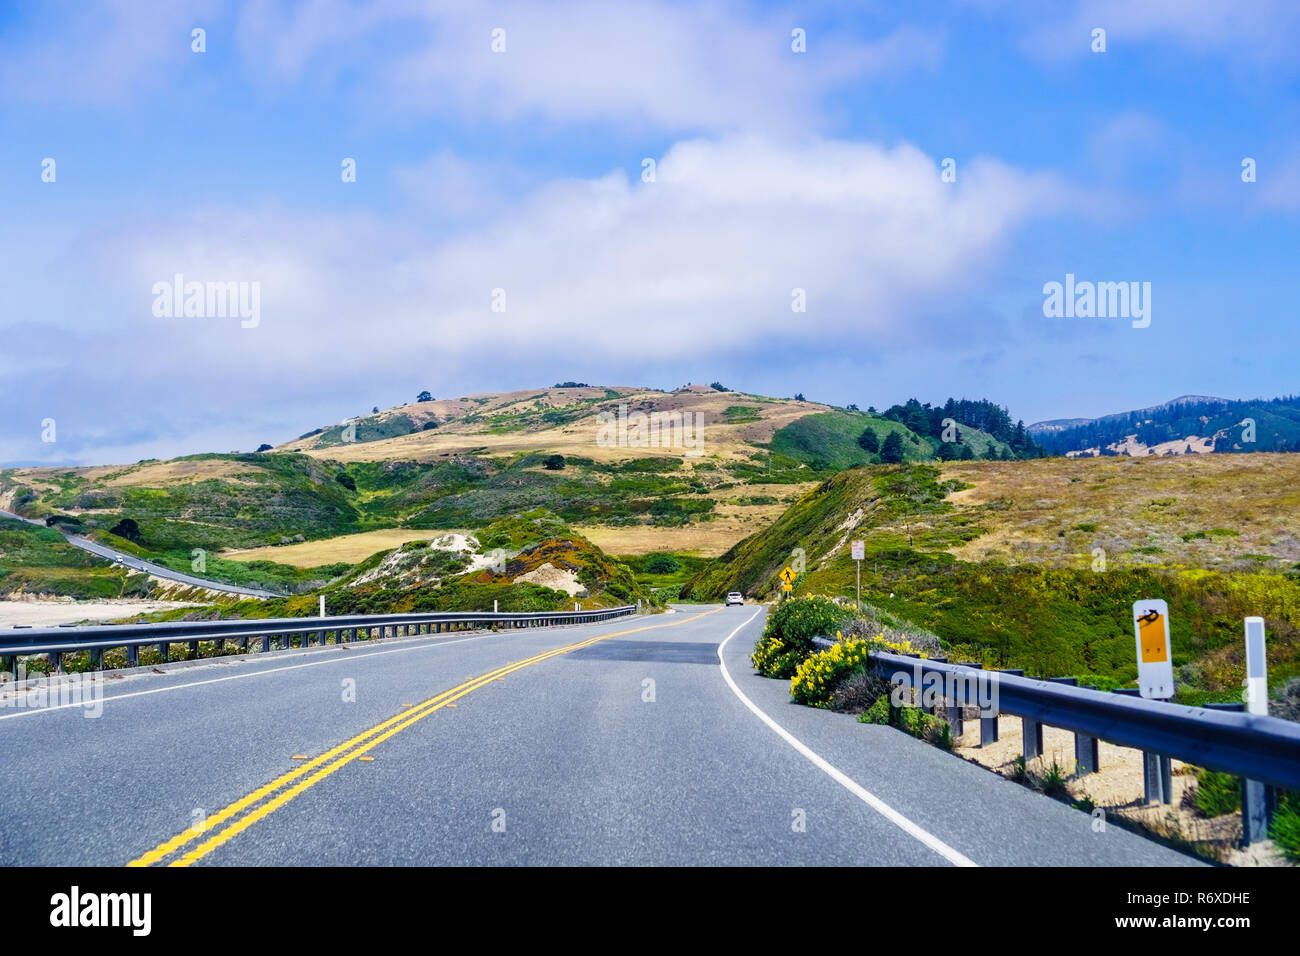 Driving on the scenic Highway 1 (Cabrillo Highway) on the Pacific Ocean coastline close to Davenport, Santa Cruz mountains visible in the background;  Stock Photo